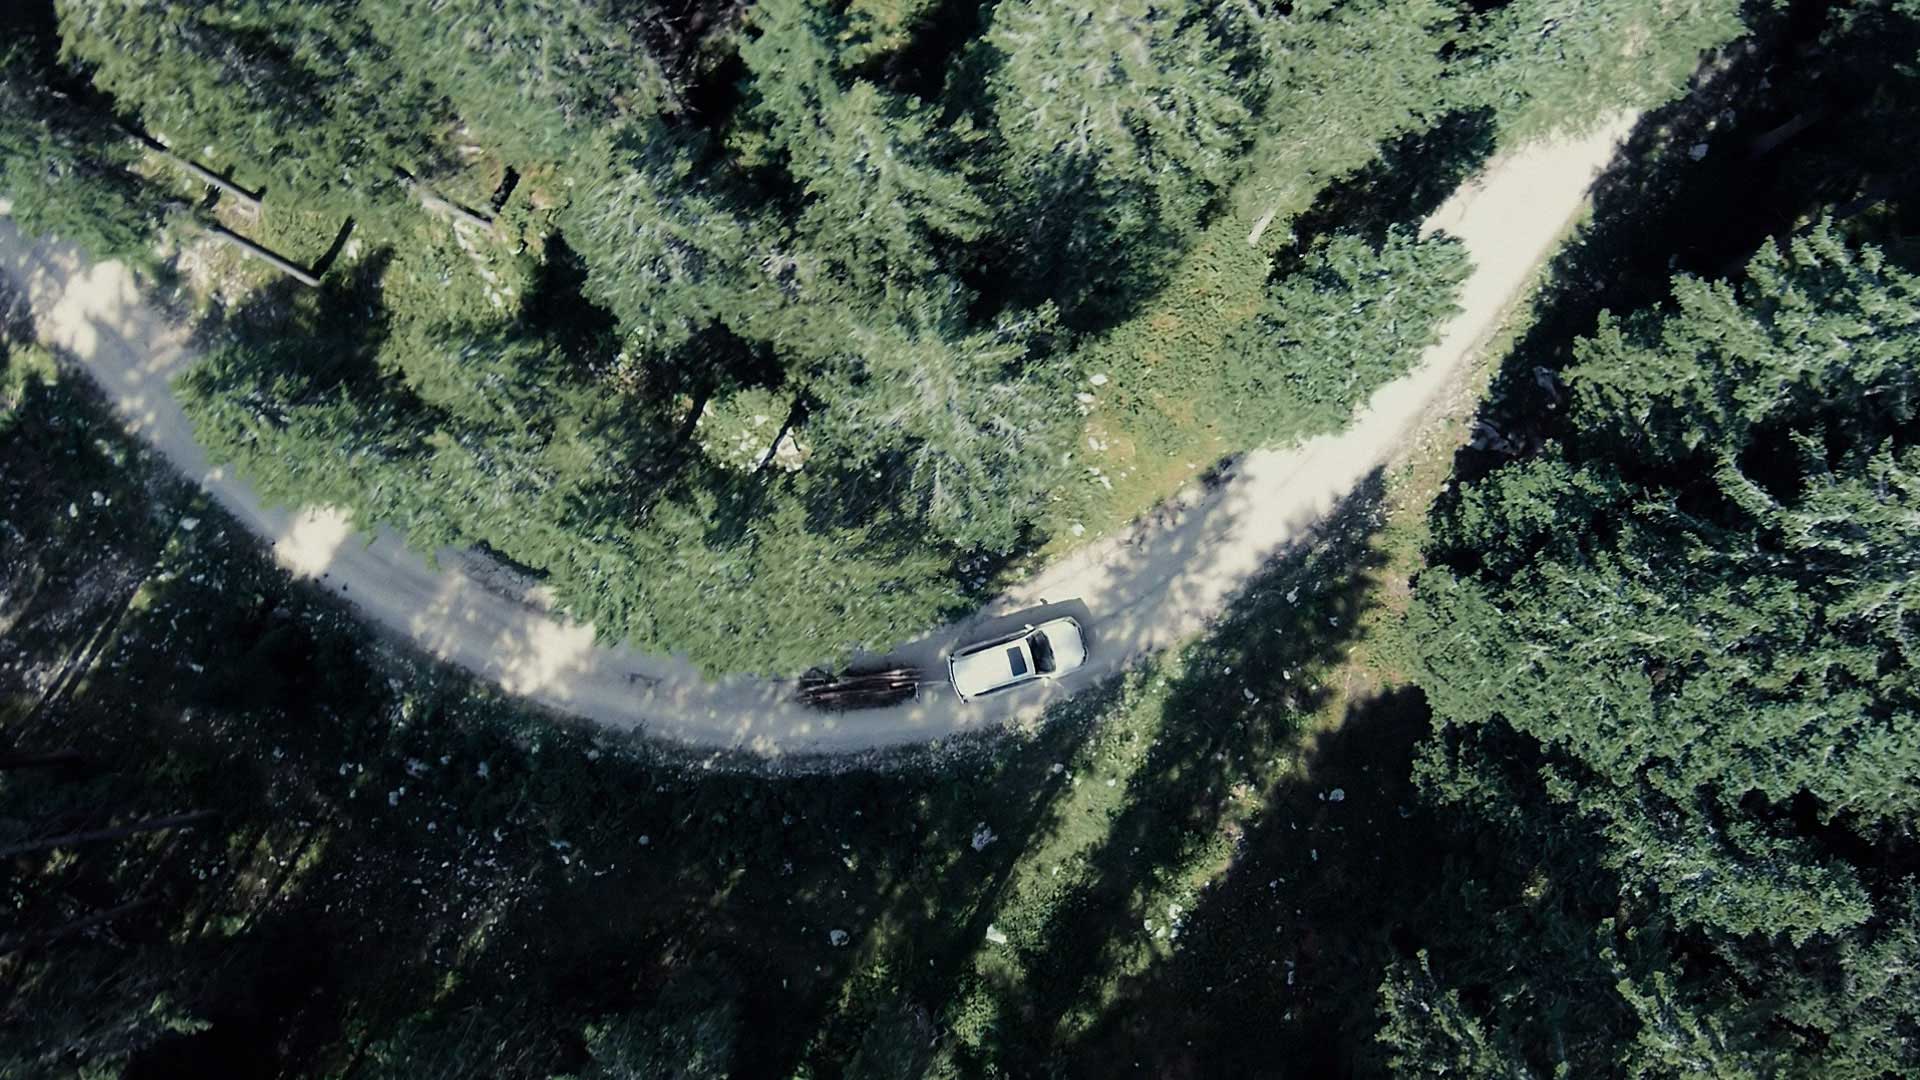 Countryroads from above. Still from Toyota Landcruiser.